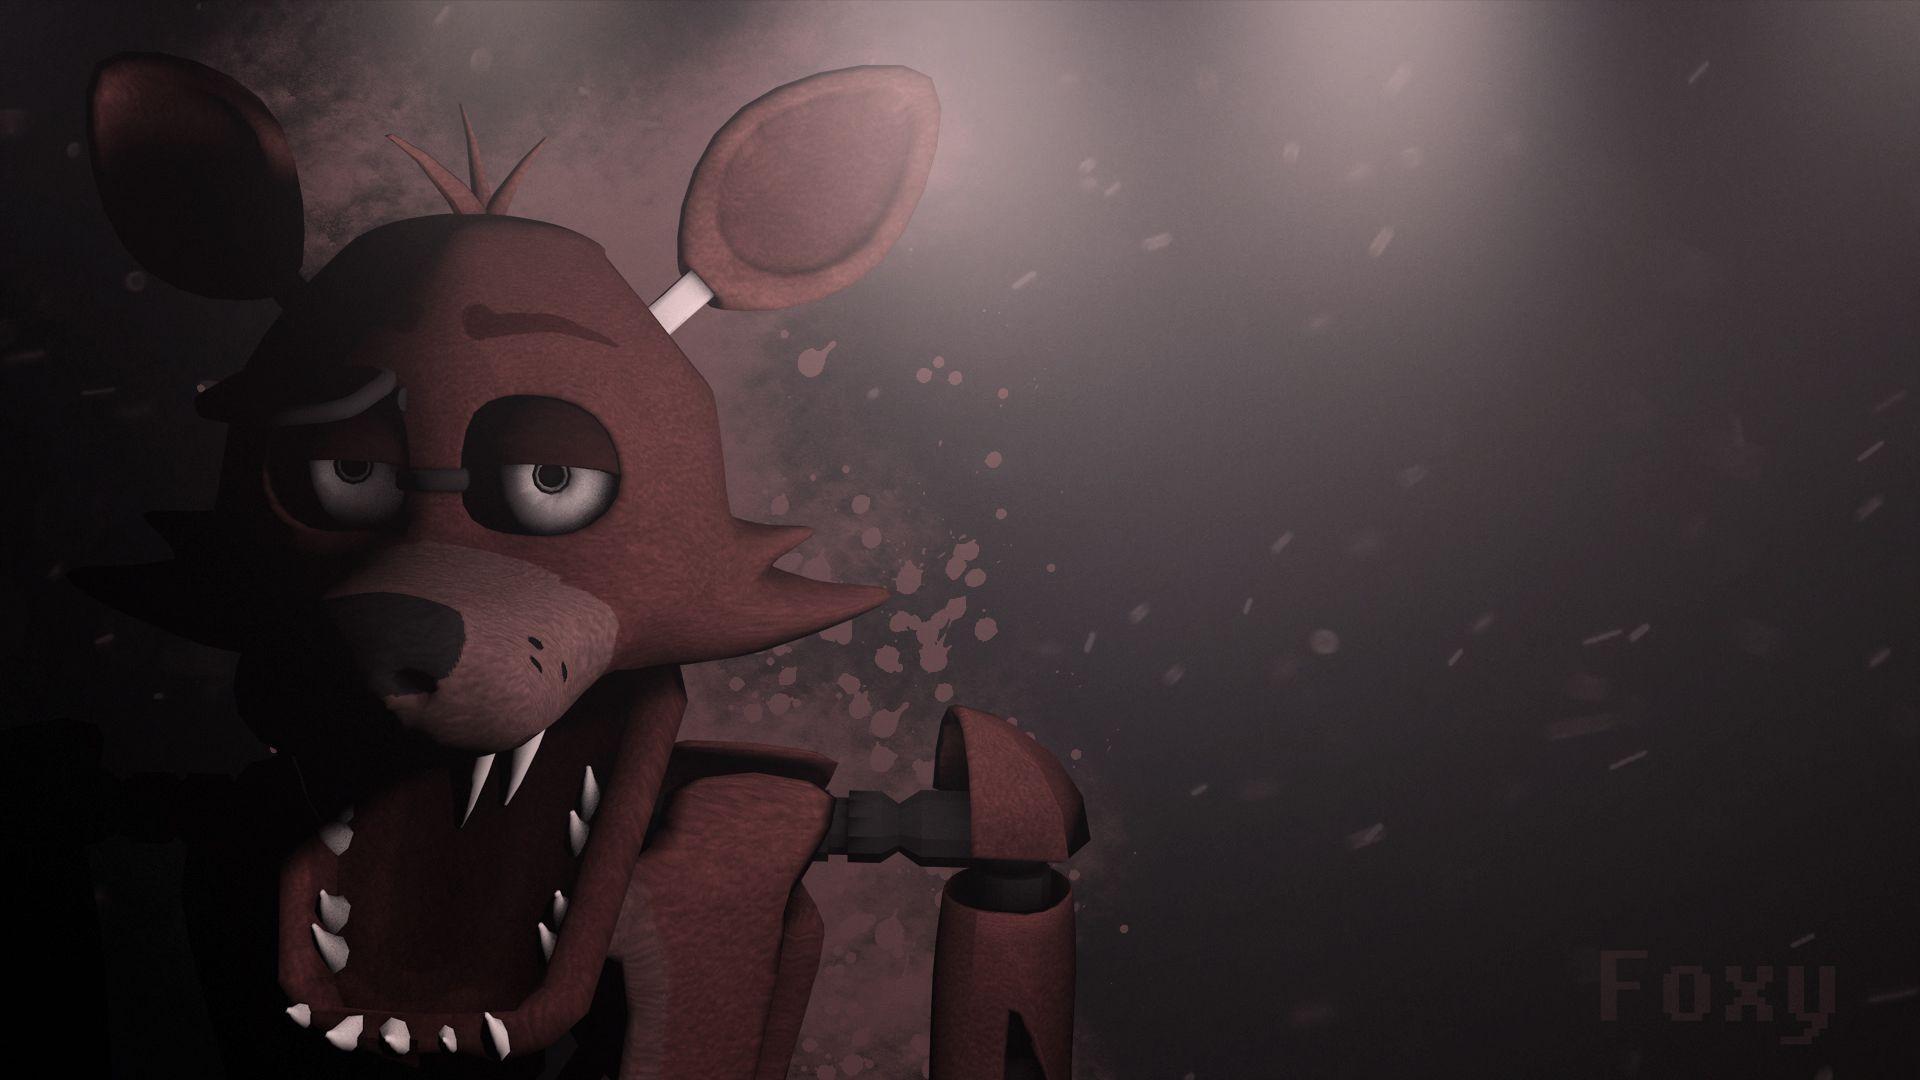 Five Nights at Freddy&Foxy Wallpapers DOWNLOAD by NiksonYT on